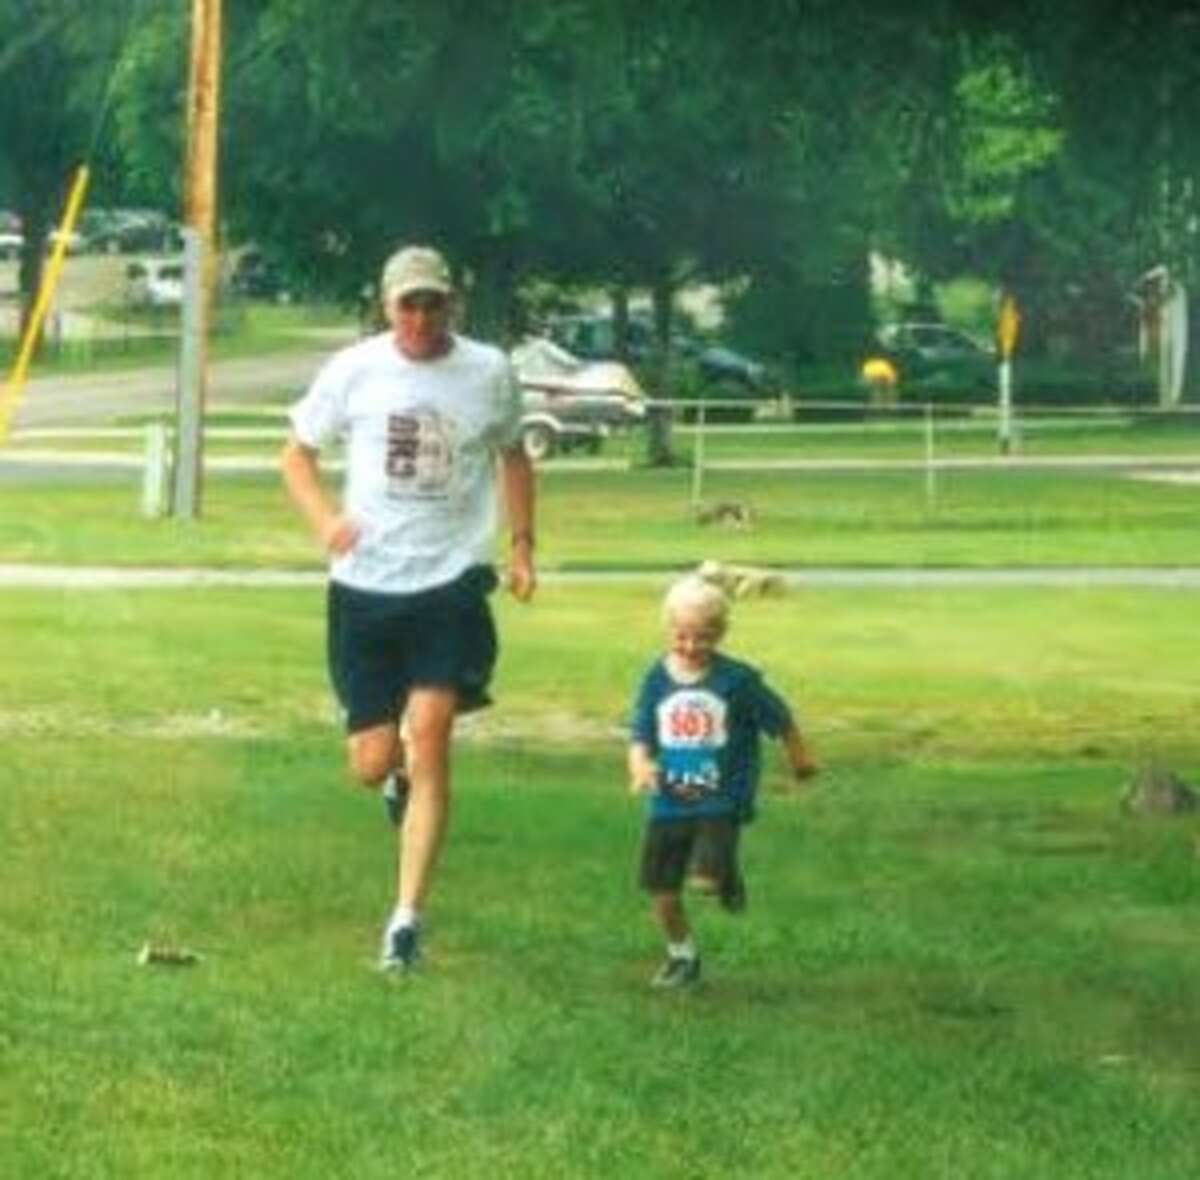 Annie, age 5 or 6, running with her dad.